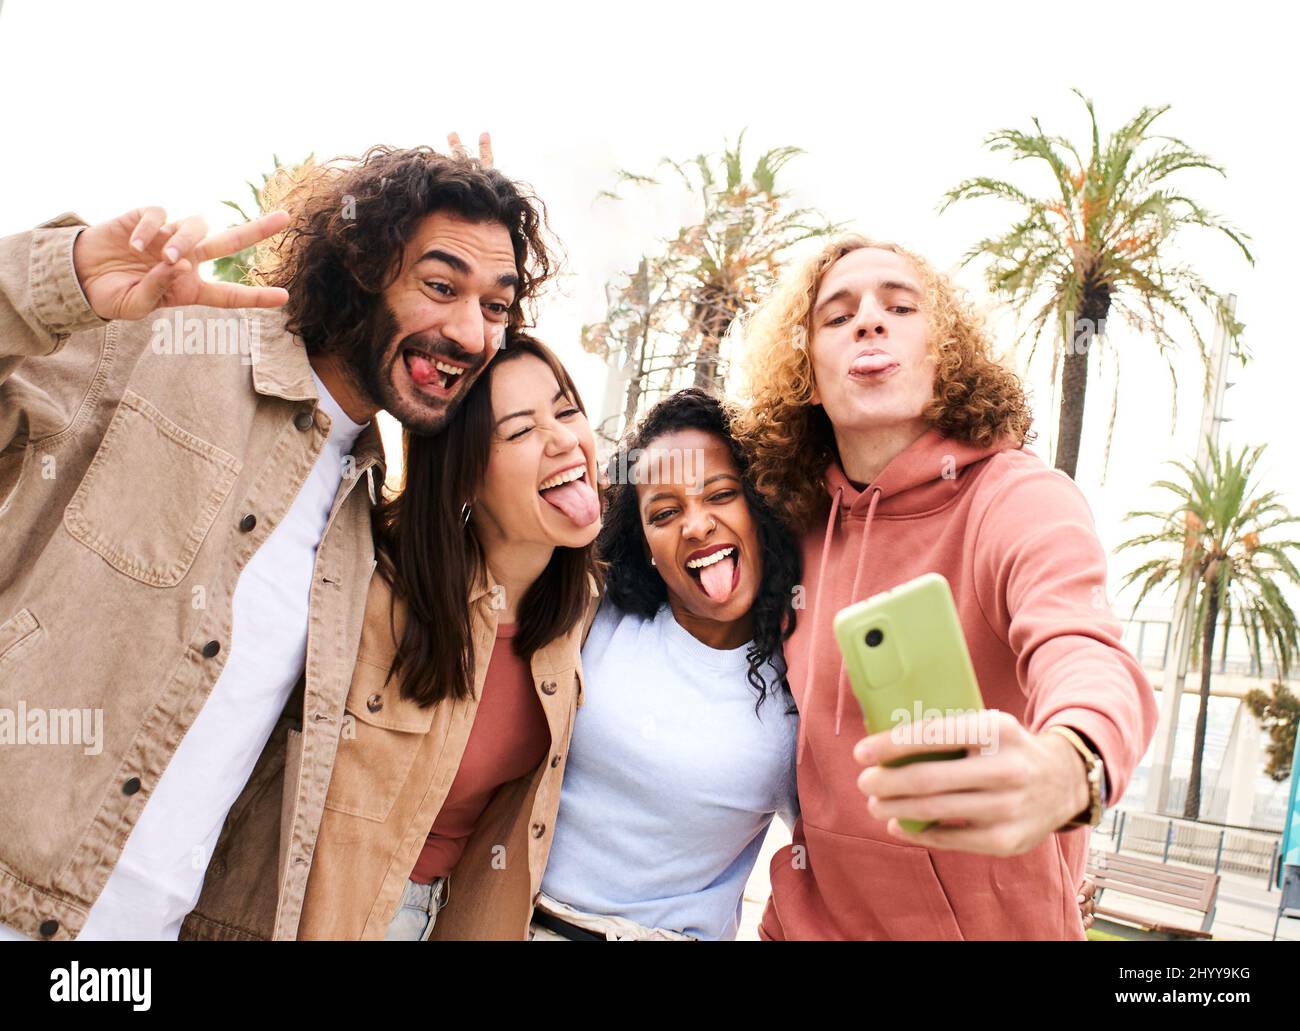 Group of cheerful young couples taking selfie portrait fool around. Happy people having fun. Concept of community, youth lifestyle and friendship Stock Photo